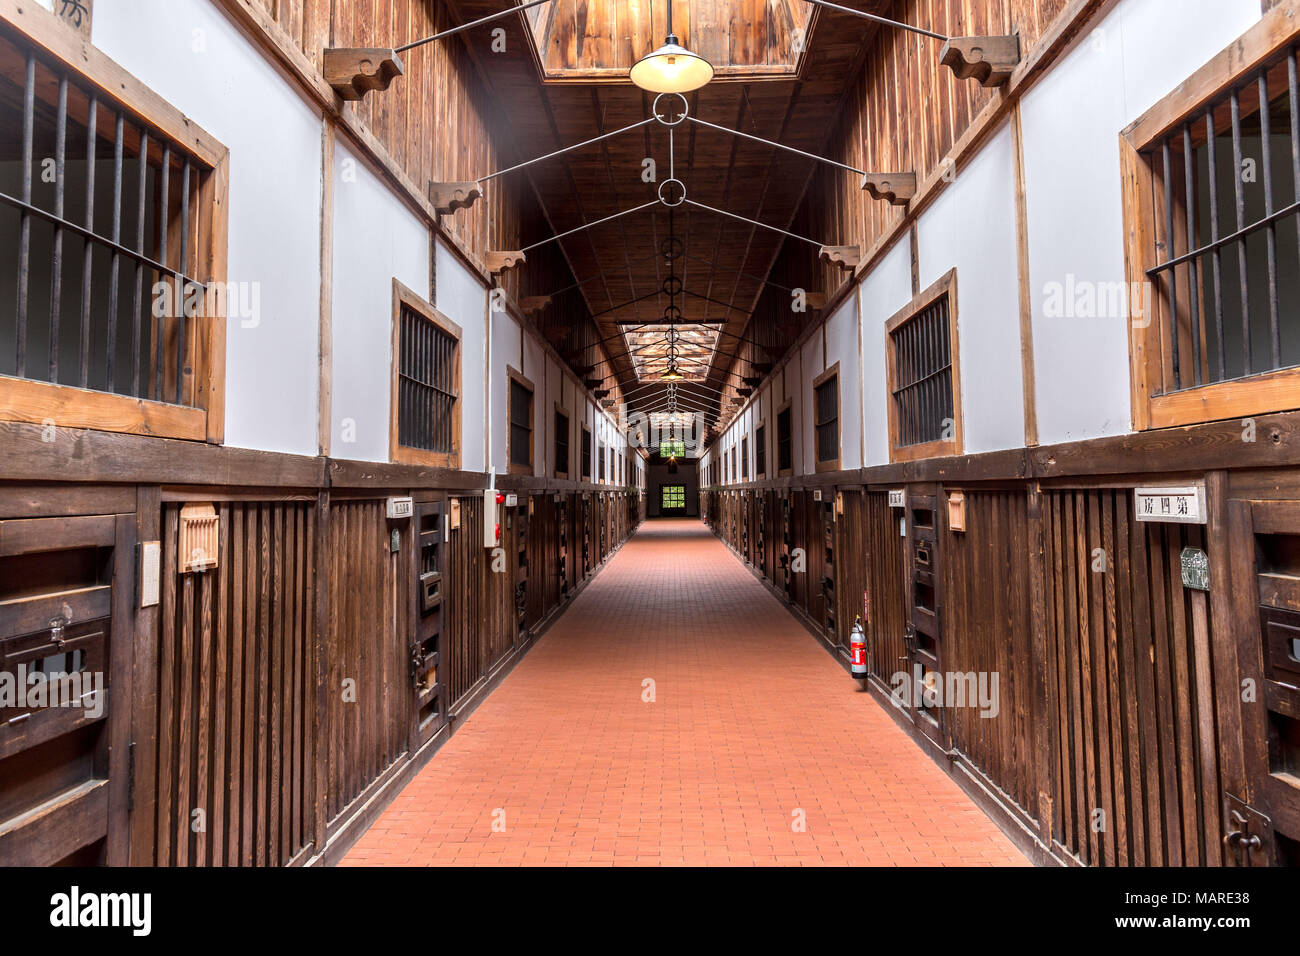 Hokkaido, Japan - August 10, 2017: Interior corridor in one of the many cell blocks where political prisoners were held during the Meiji Era Stock Photo